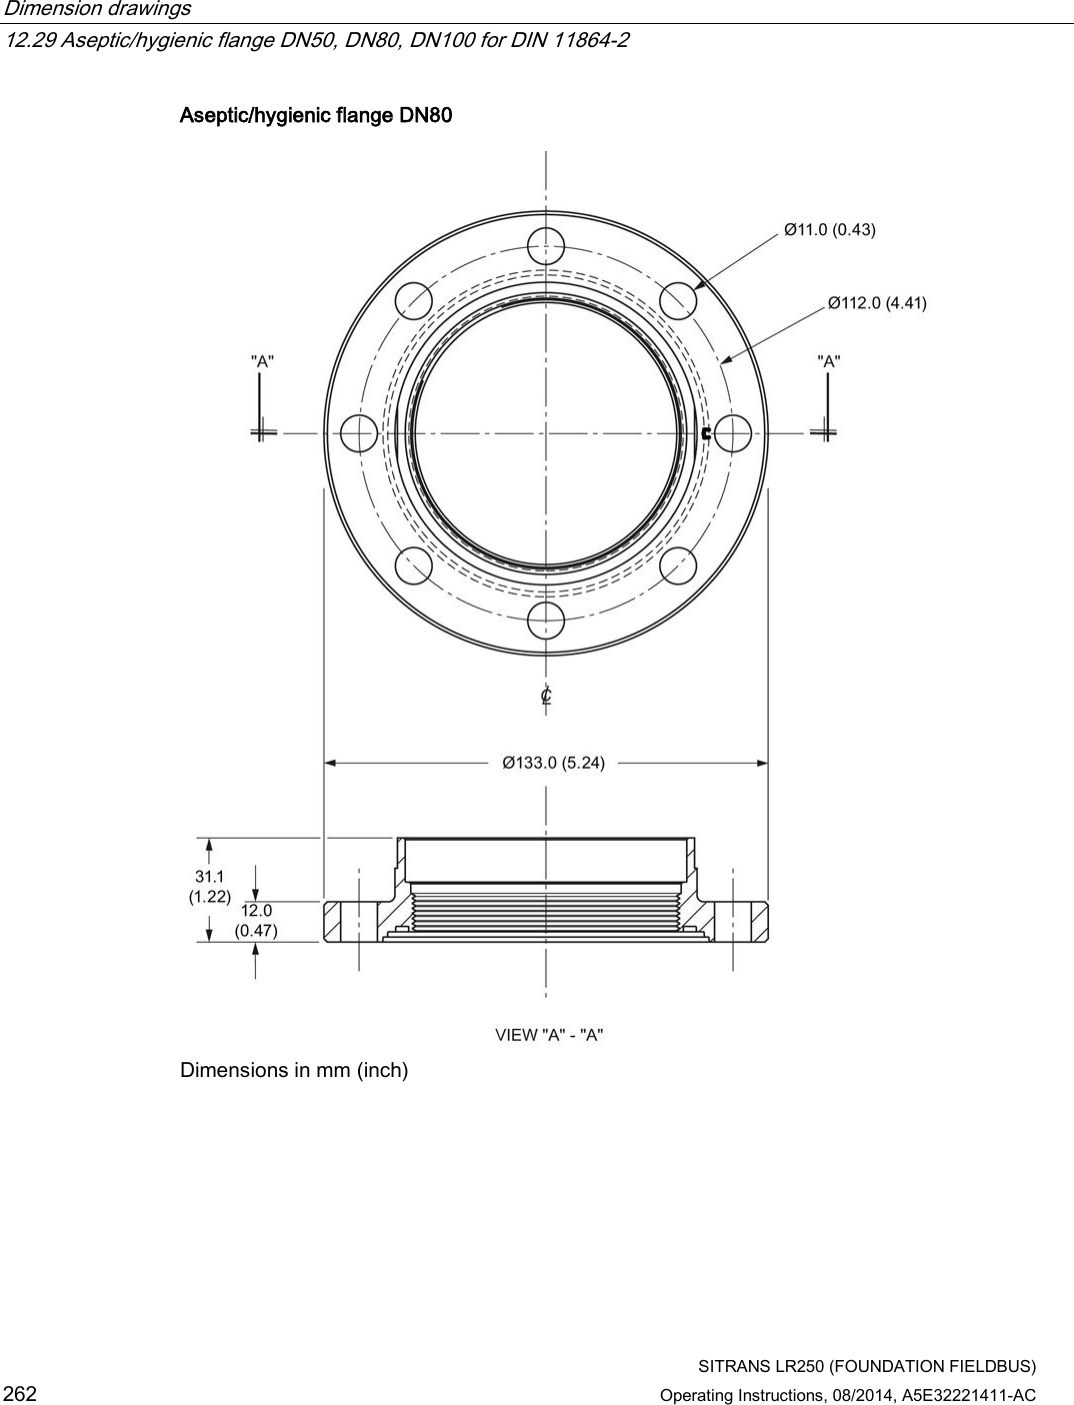 Dimension drawings   12.29 Aseptic/hygienic flange DN50, DN80, DN100 for DIN 11864-2  SITRANS LR250 (FOUNDATION FIELDBUS) 262 Operating Instructions, 08/2014, A5E32221411-AC Aseptic/hygienic flange DN80  Dimensions in mm (inch) 